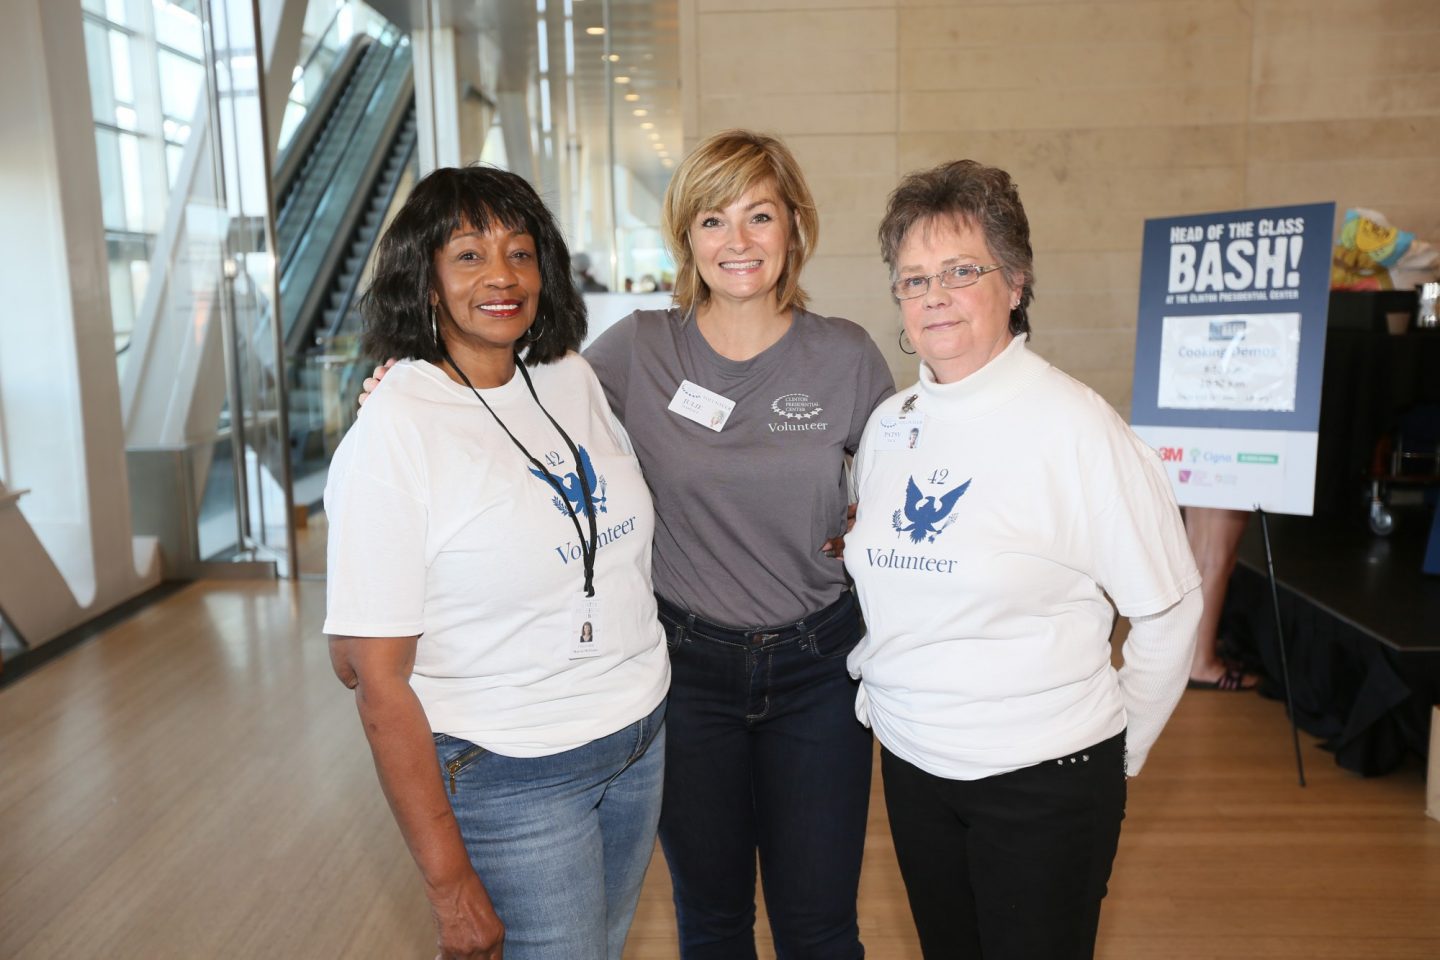 Three Clinton Center volunteers serving at the Head of the Class Bash